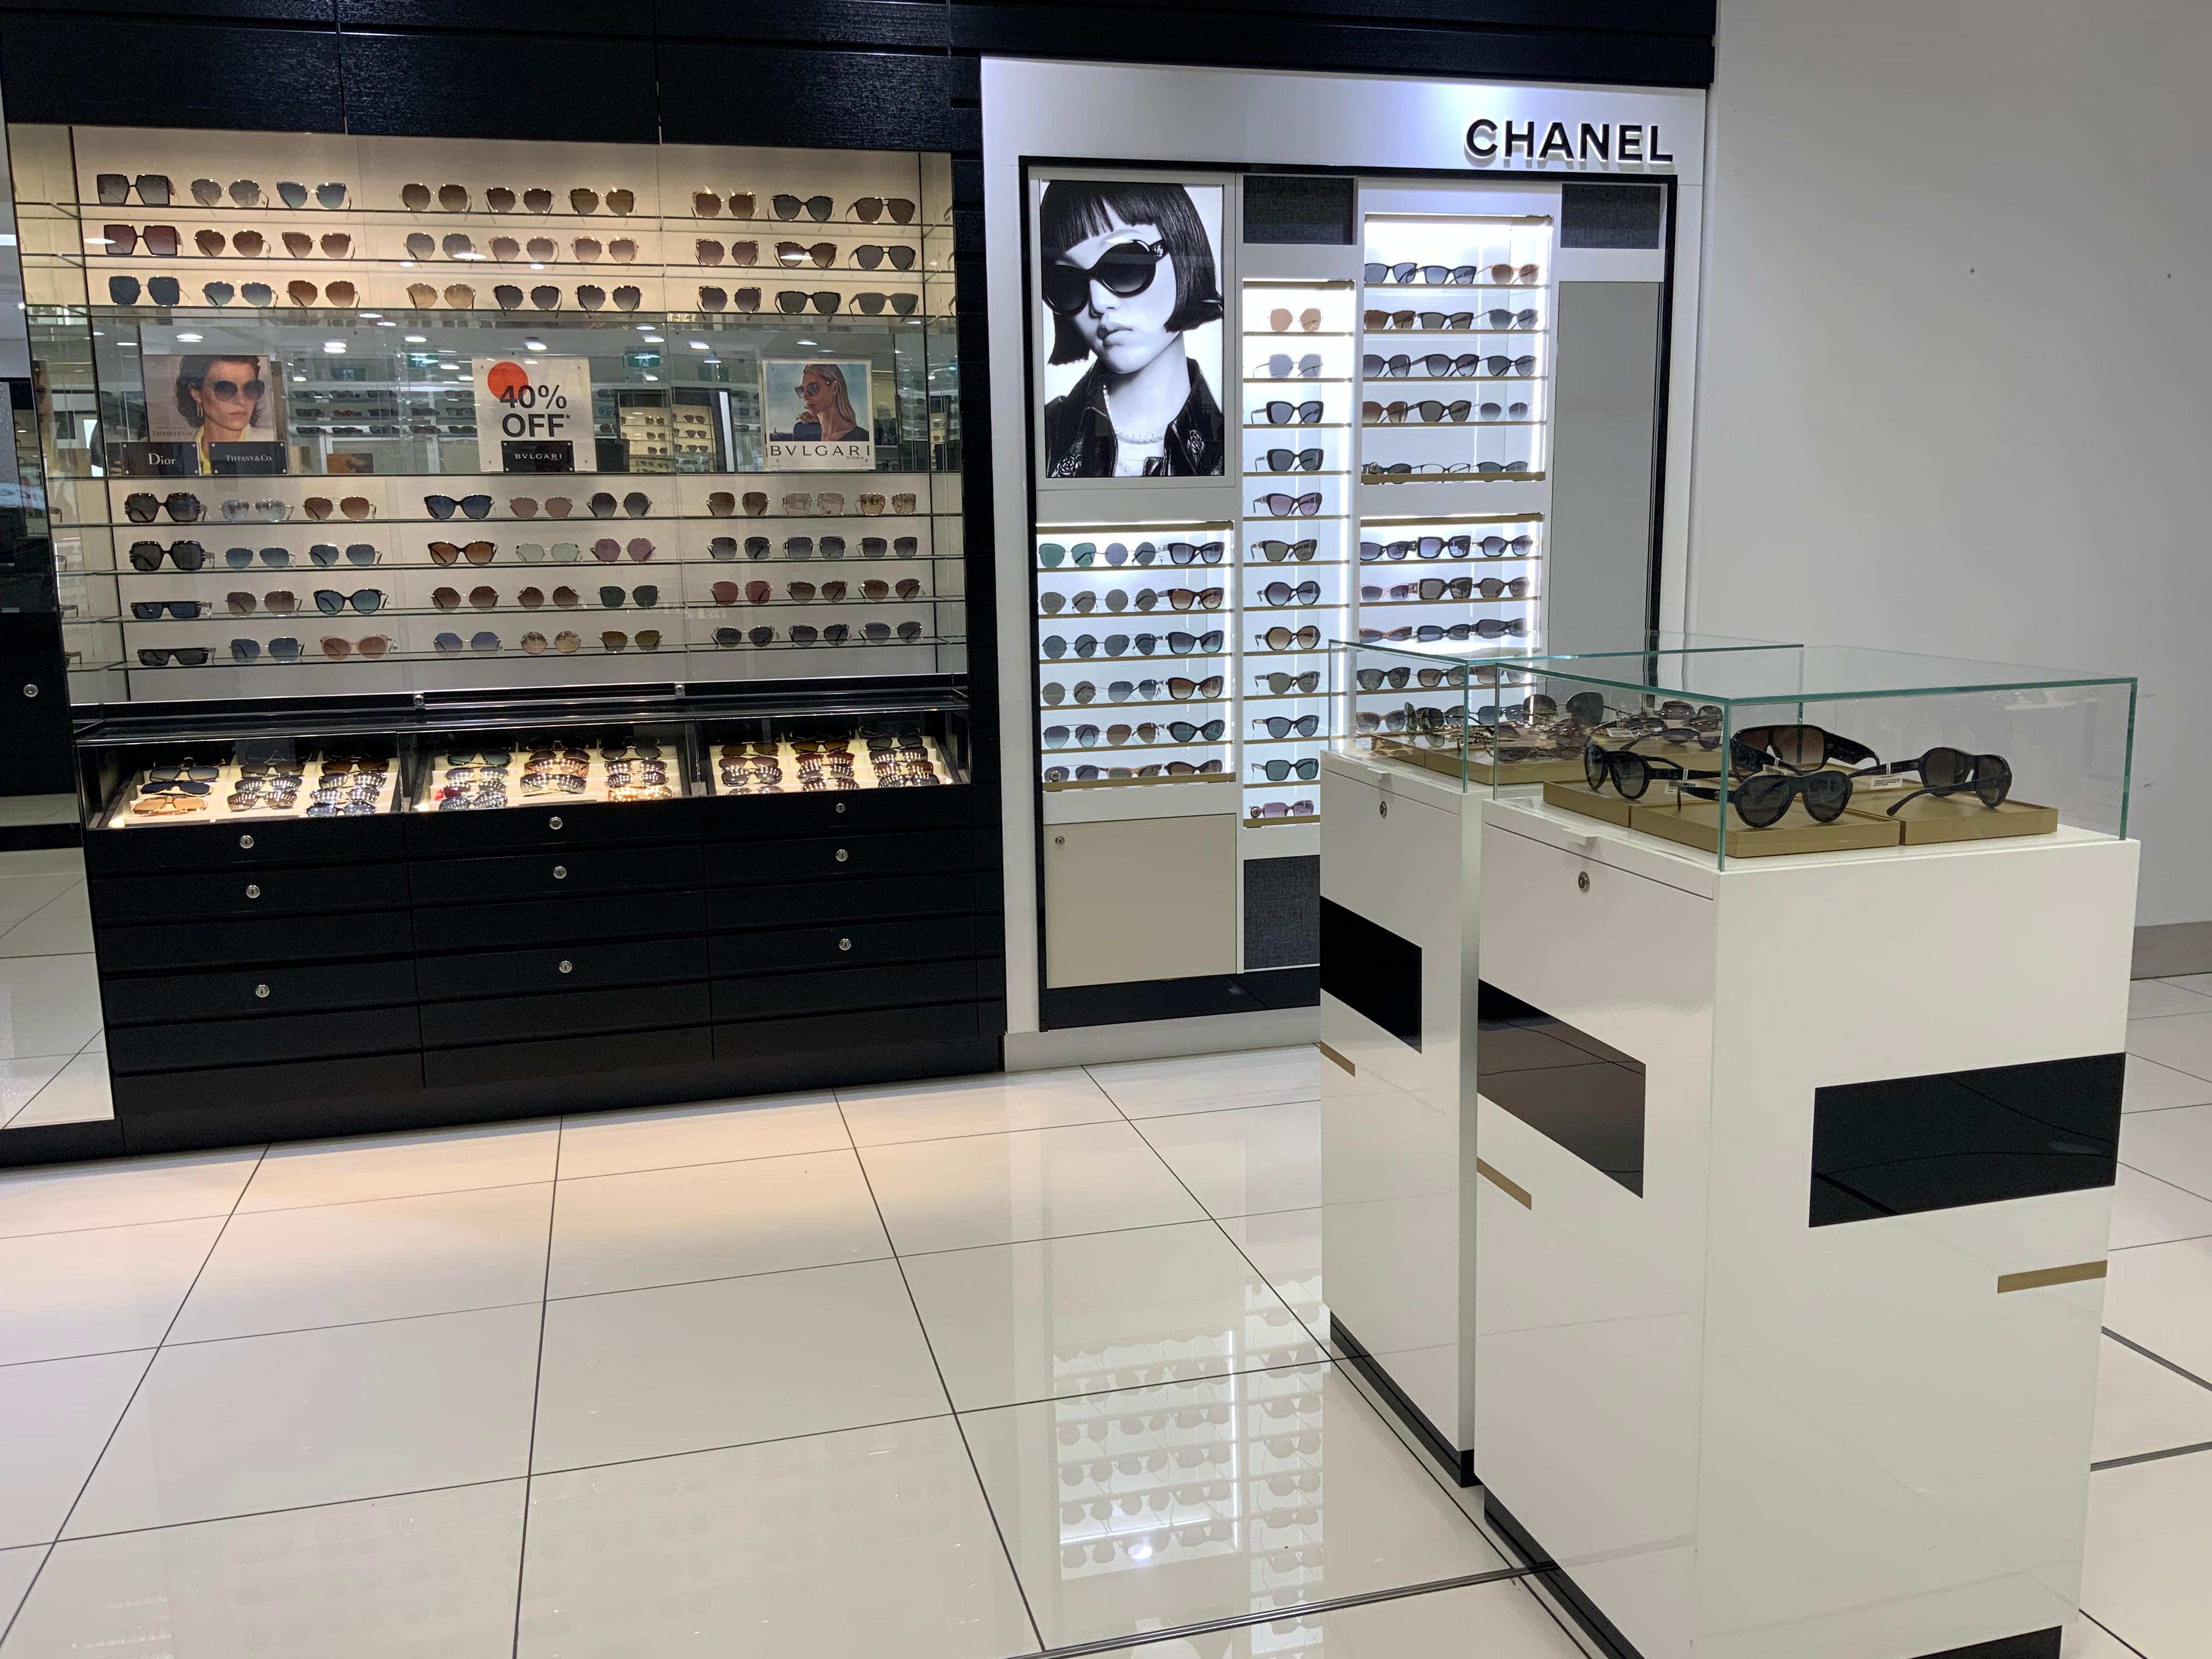 Images Sunglass Hut Myer Adelaide